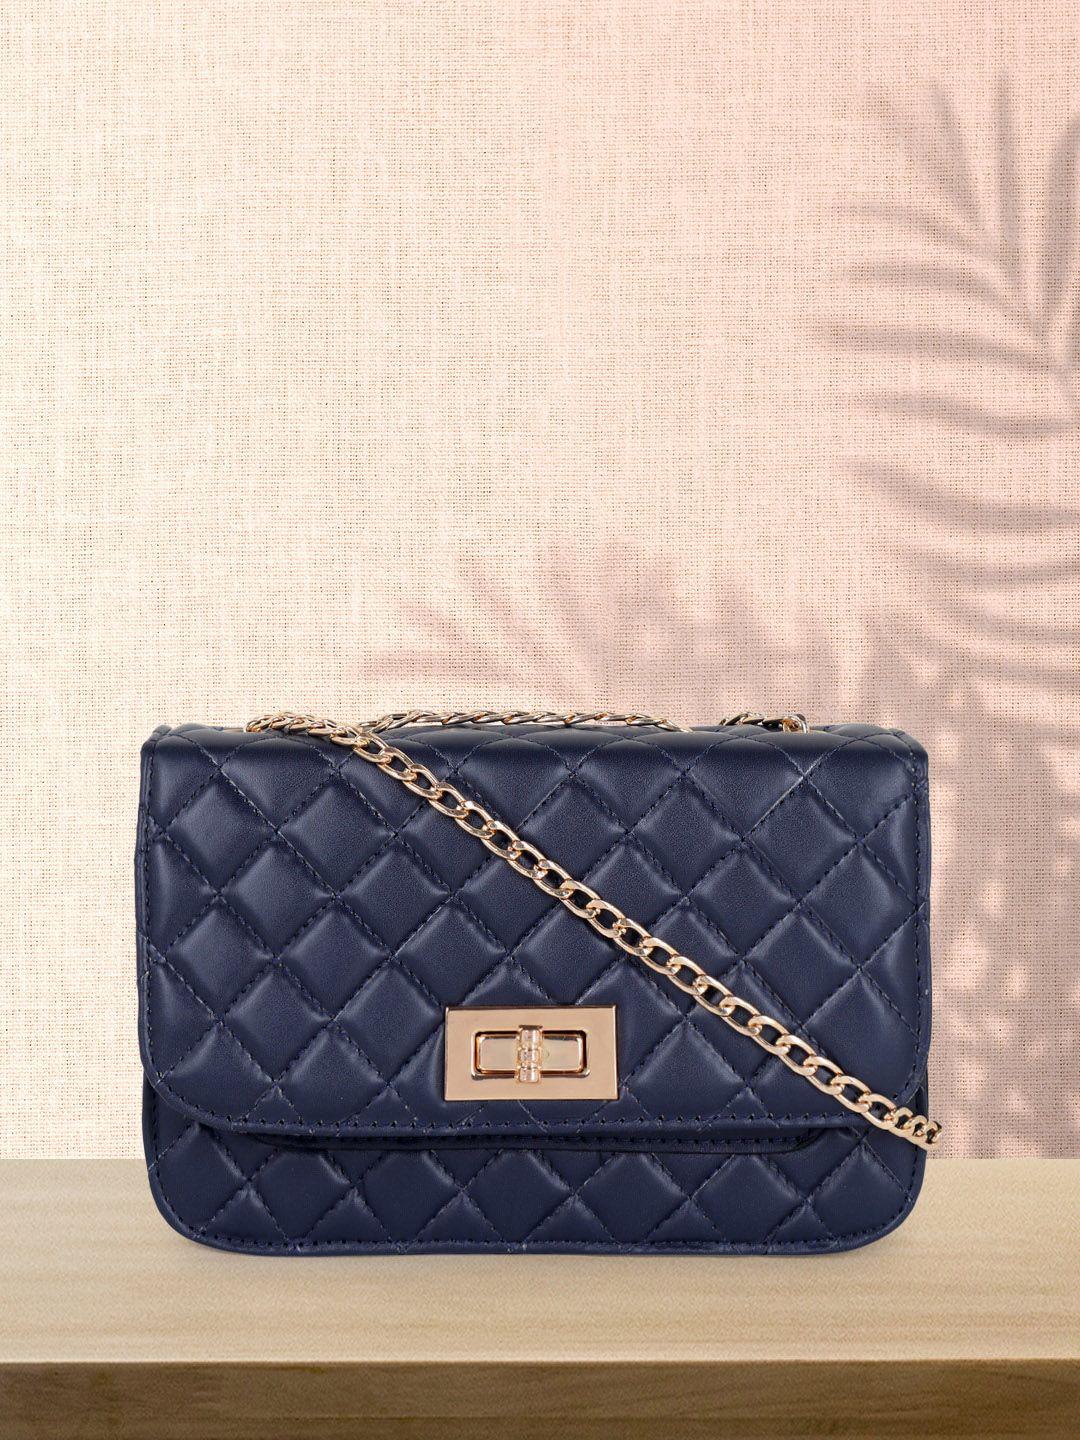 carlton london navy blue sling bag with quilted